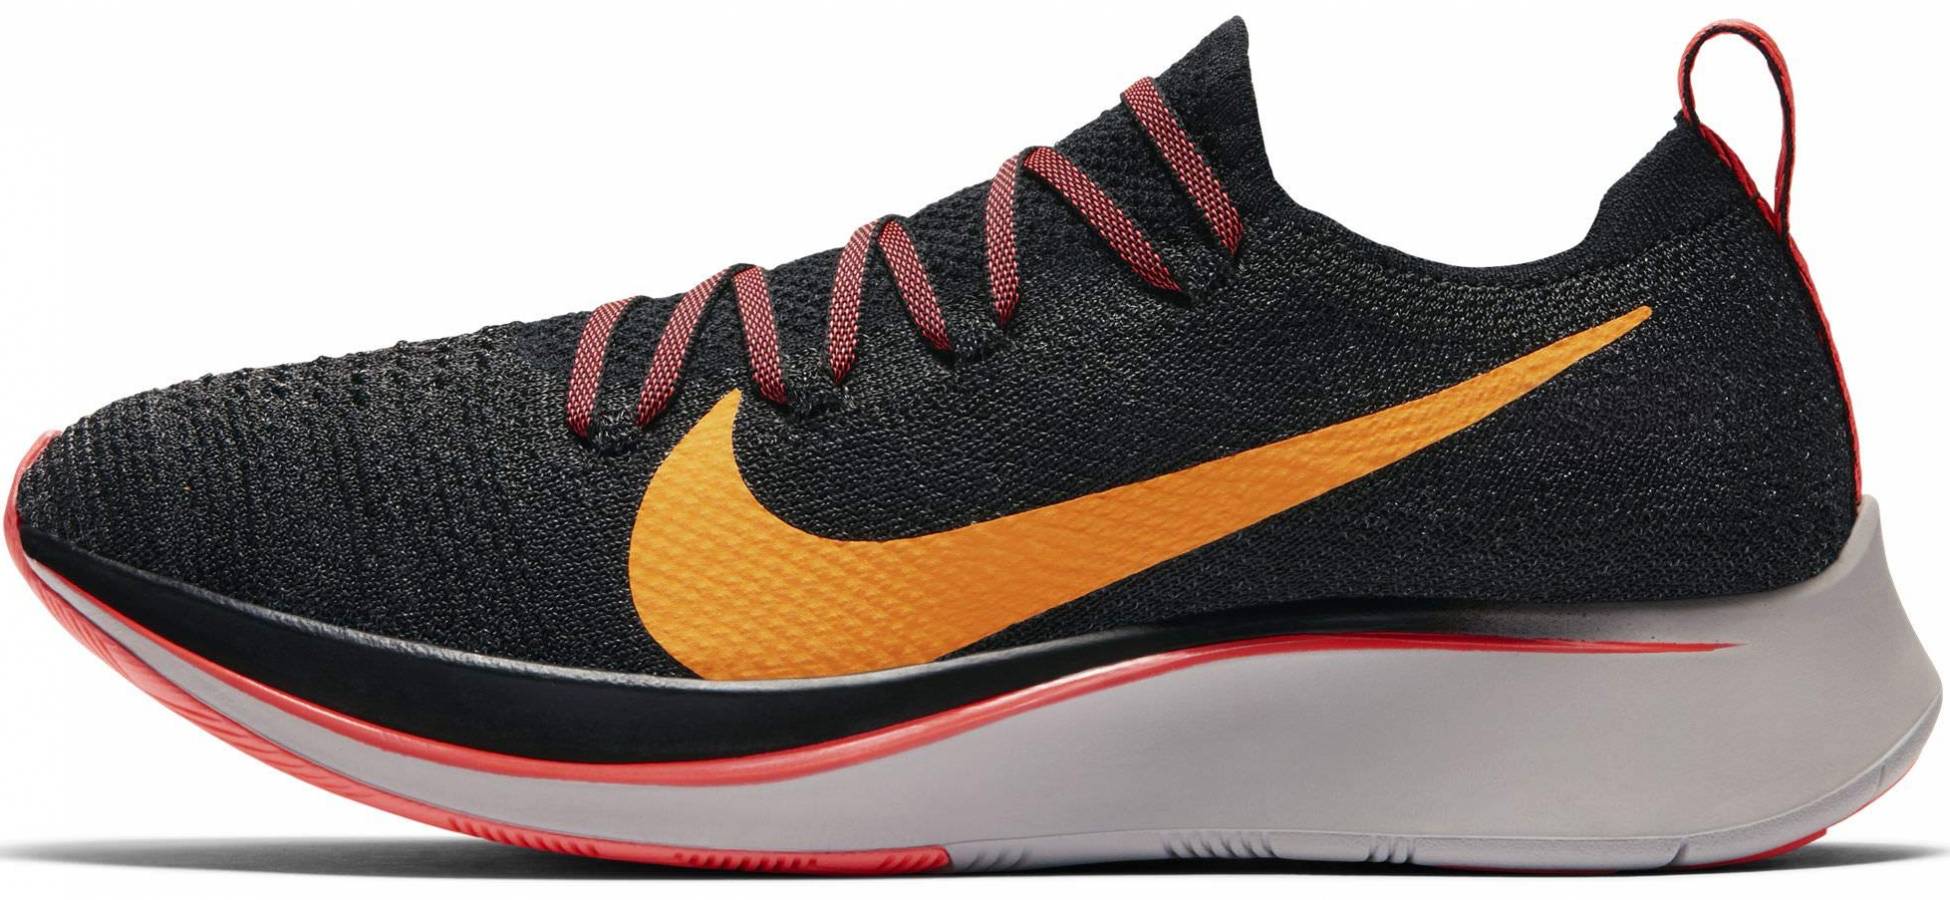 Nike Zoom Fly Flyknit - Deals, Facts 